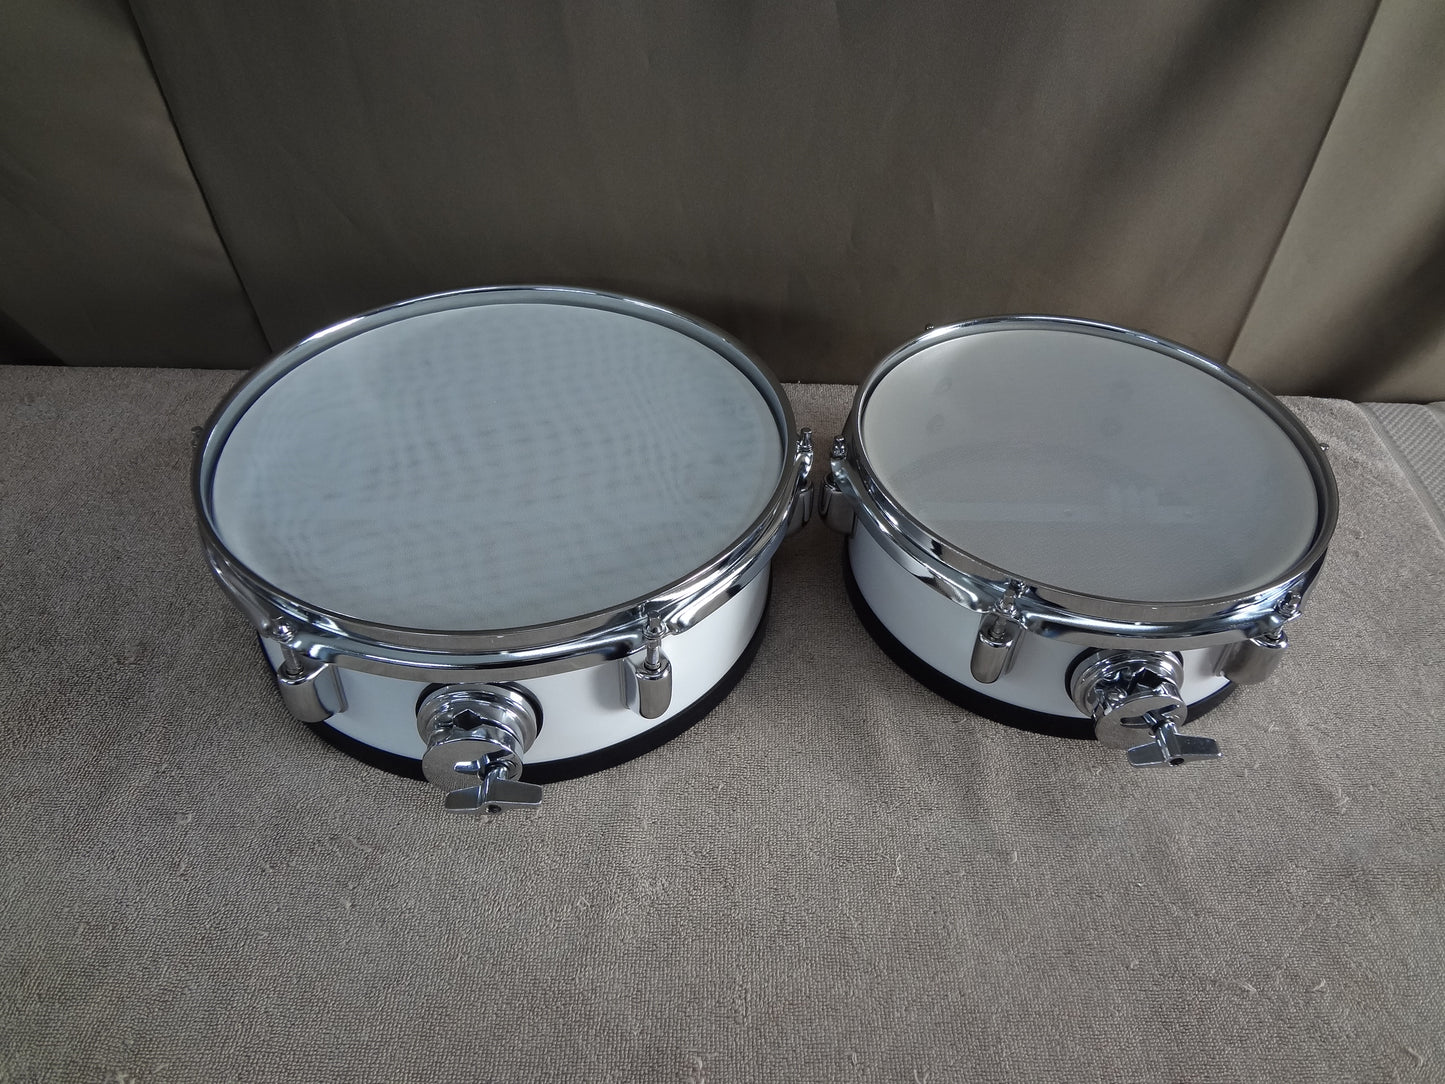 NEW 4 PIECE CUSTOM ELECTRONIC DRUM SHELL PACK - MONO WHITE